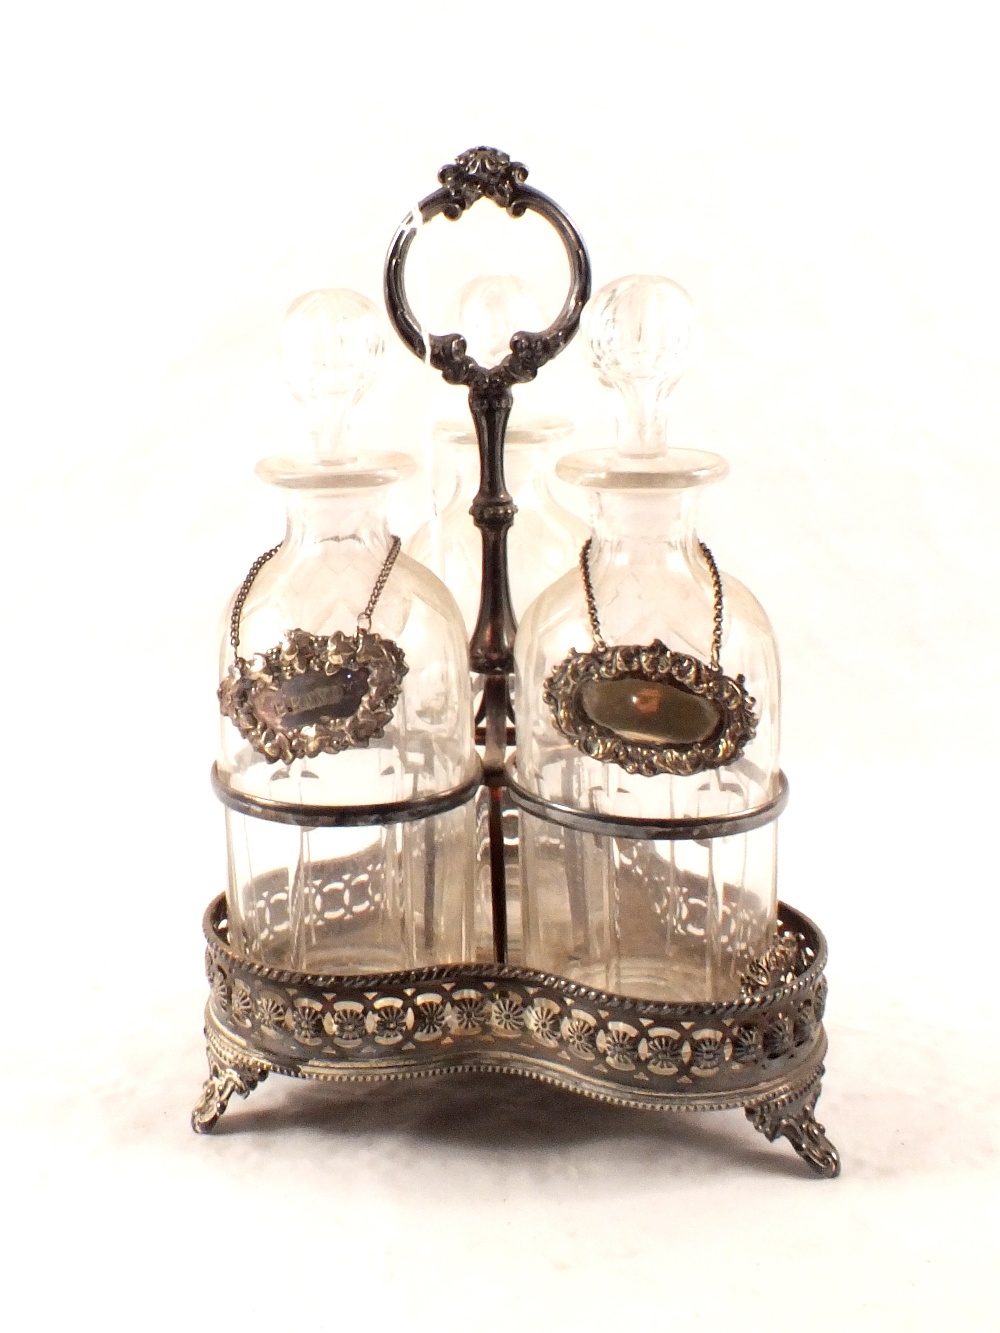 A silver plated three decanter stand with cut glass decanters